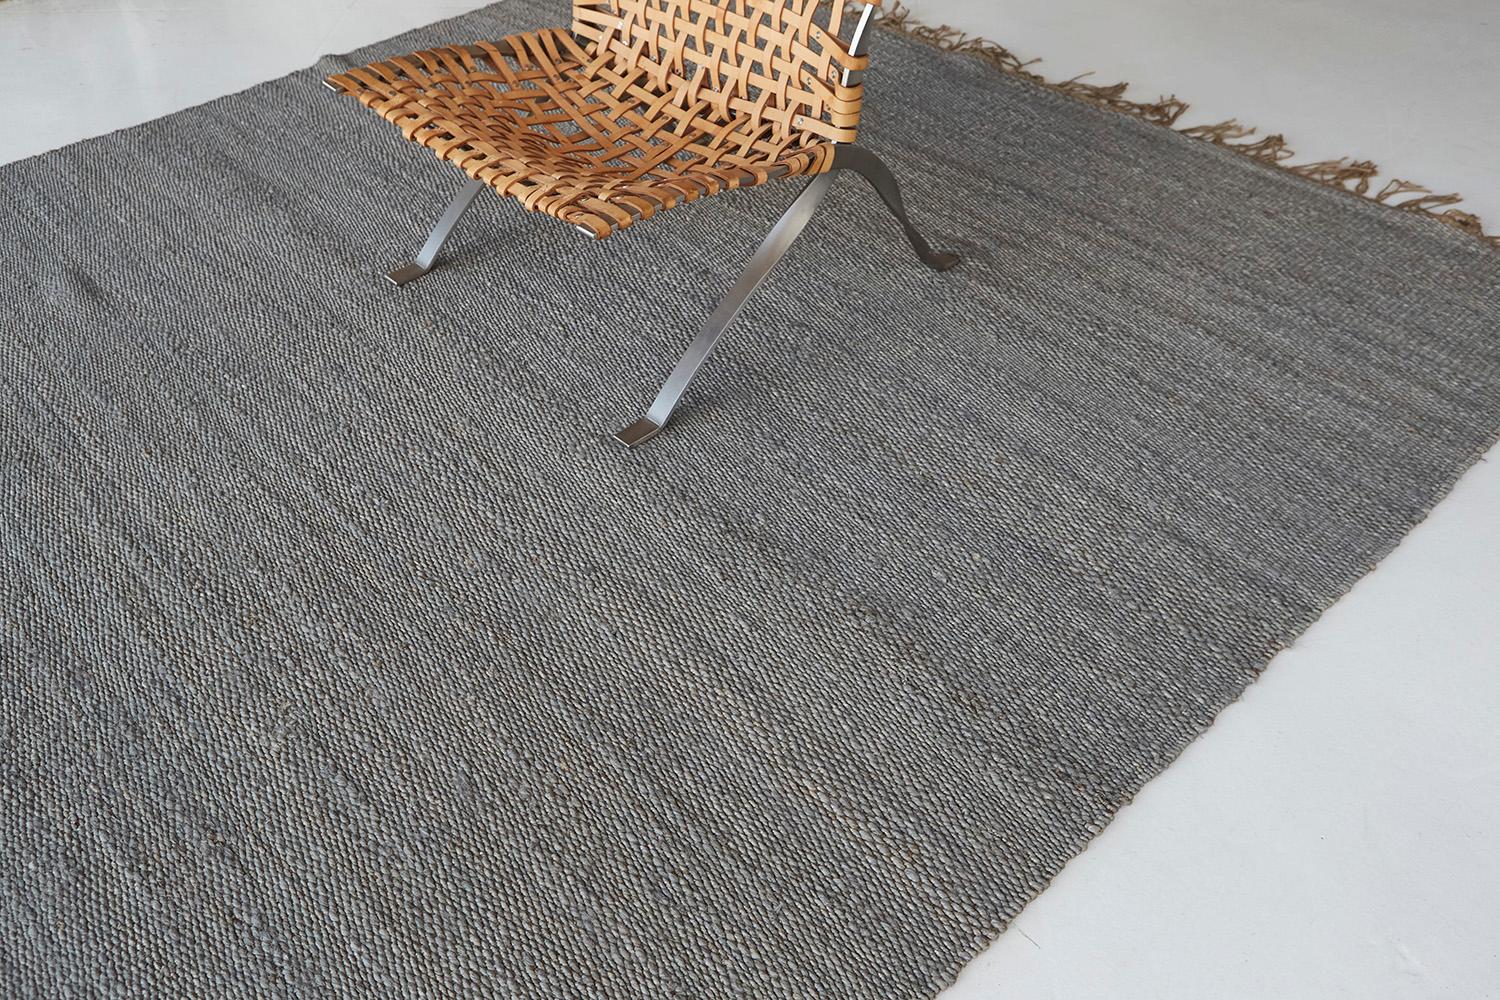 A solid design flatweave features a horizontal stroke of the neutral tone of hemp. Embedded with beautiful tassels that match the simplicity yet a sophisticated kind of masterpiece. This decor will add harmonies to your modern interior and lift the